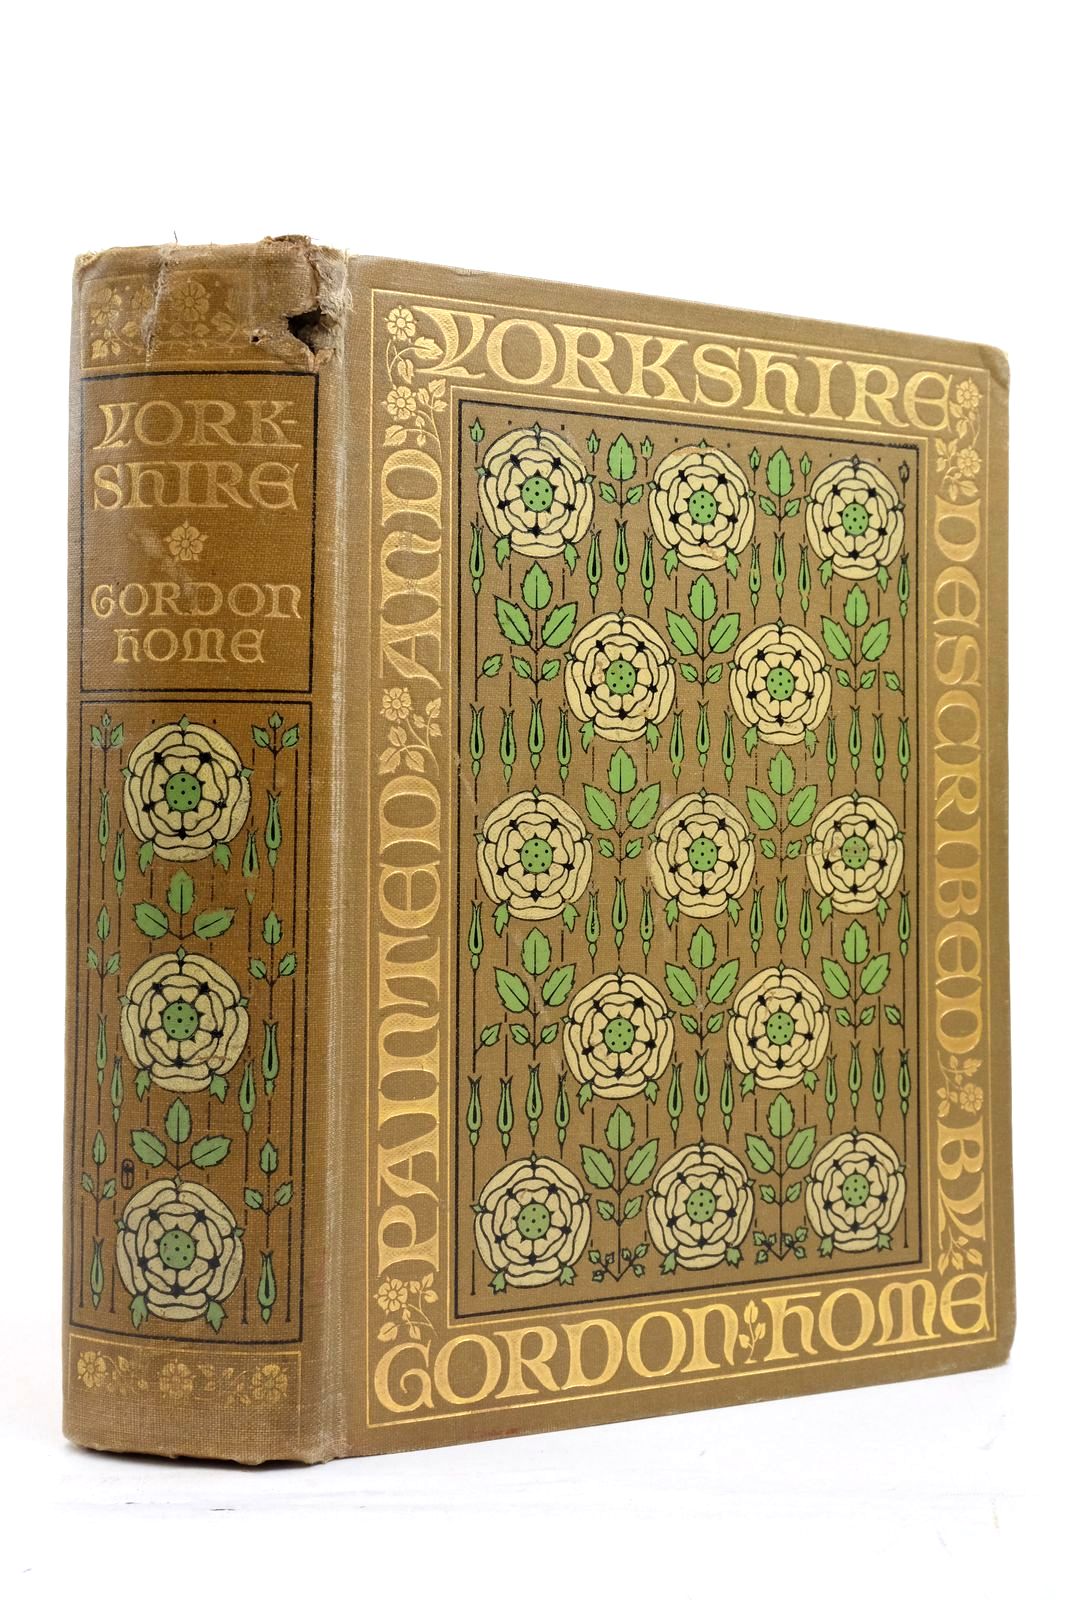 Photo of YORKSHIRE written by Home, Gordon illustrated by Home, Gordon published by Adam & Charles Black (STOCK CODE: 2137557)  for sale by Stella & Rose's Books